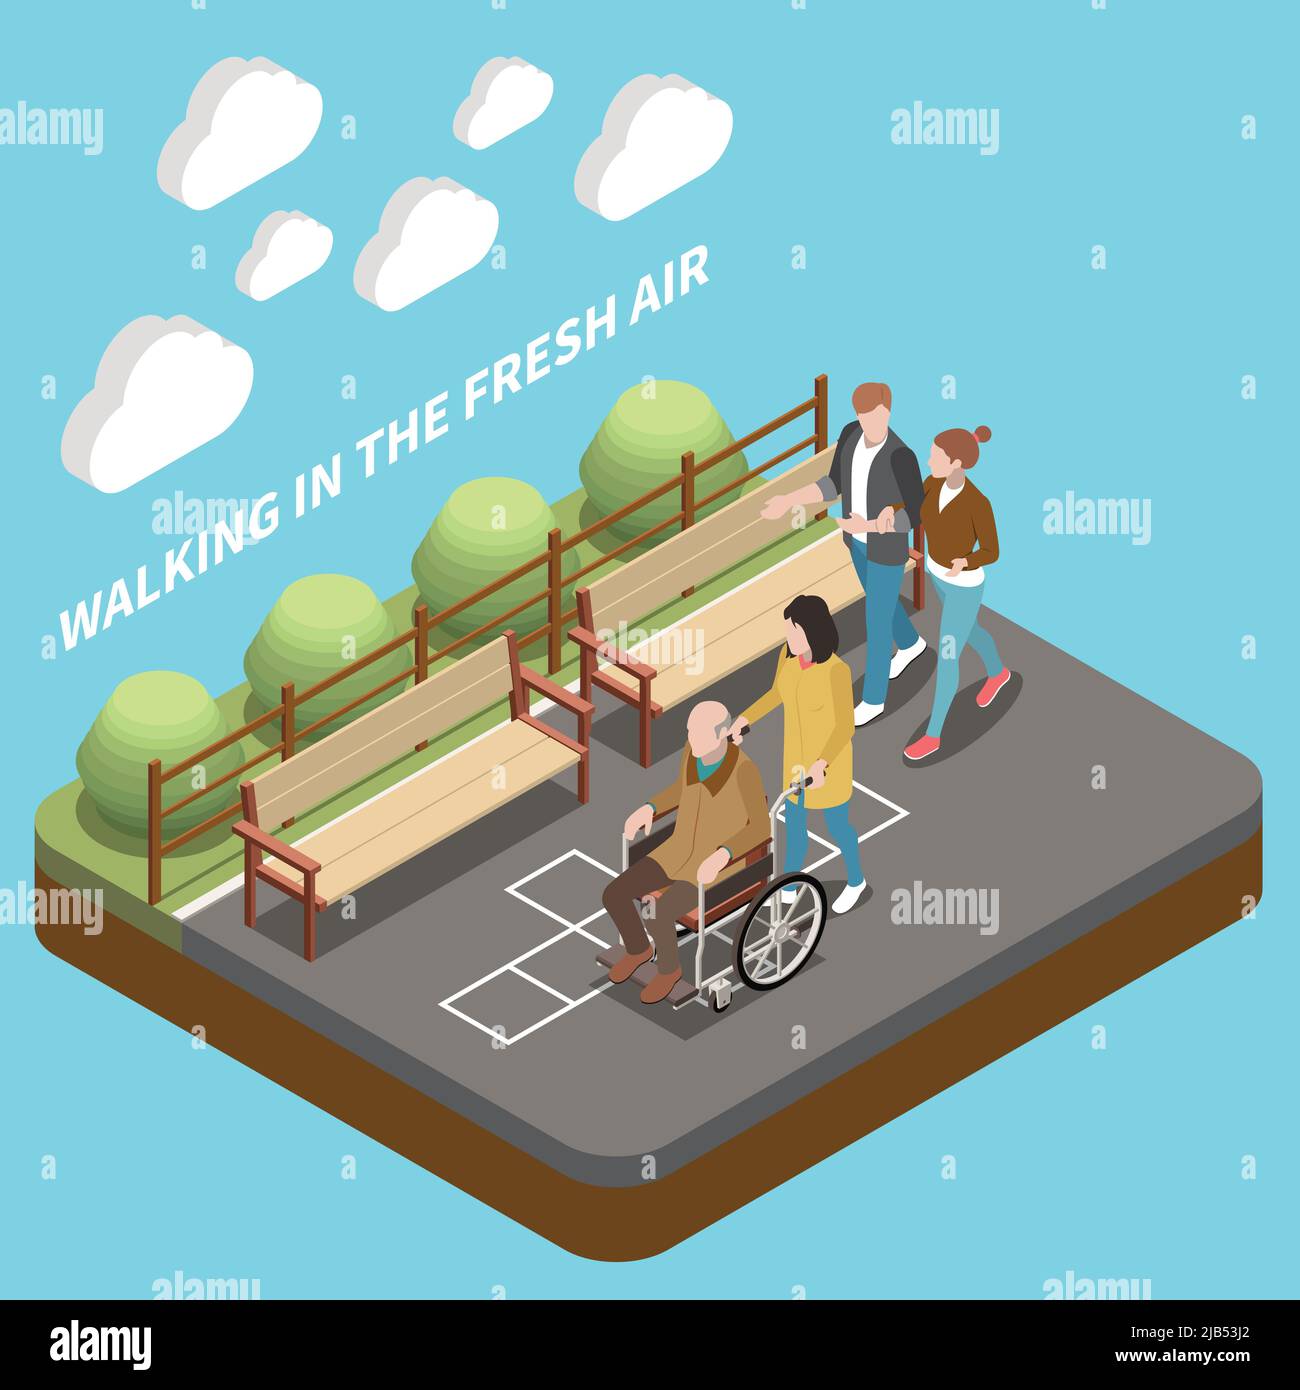 Elderly people professional social help service isometric composition with text and park lane with walking people vector illustration Stock Vector